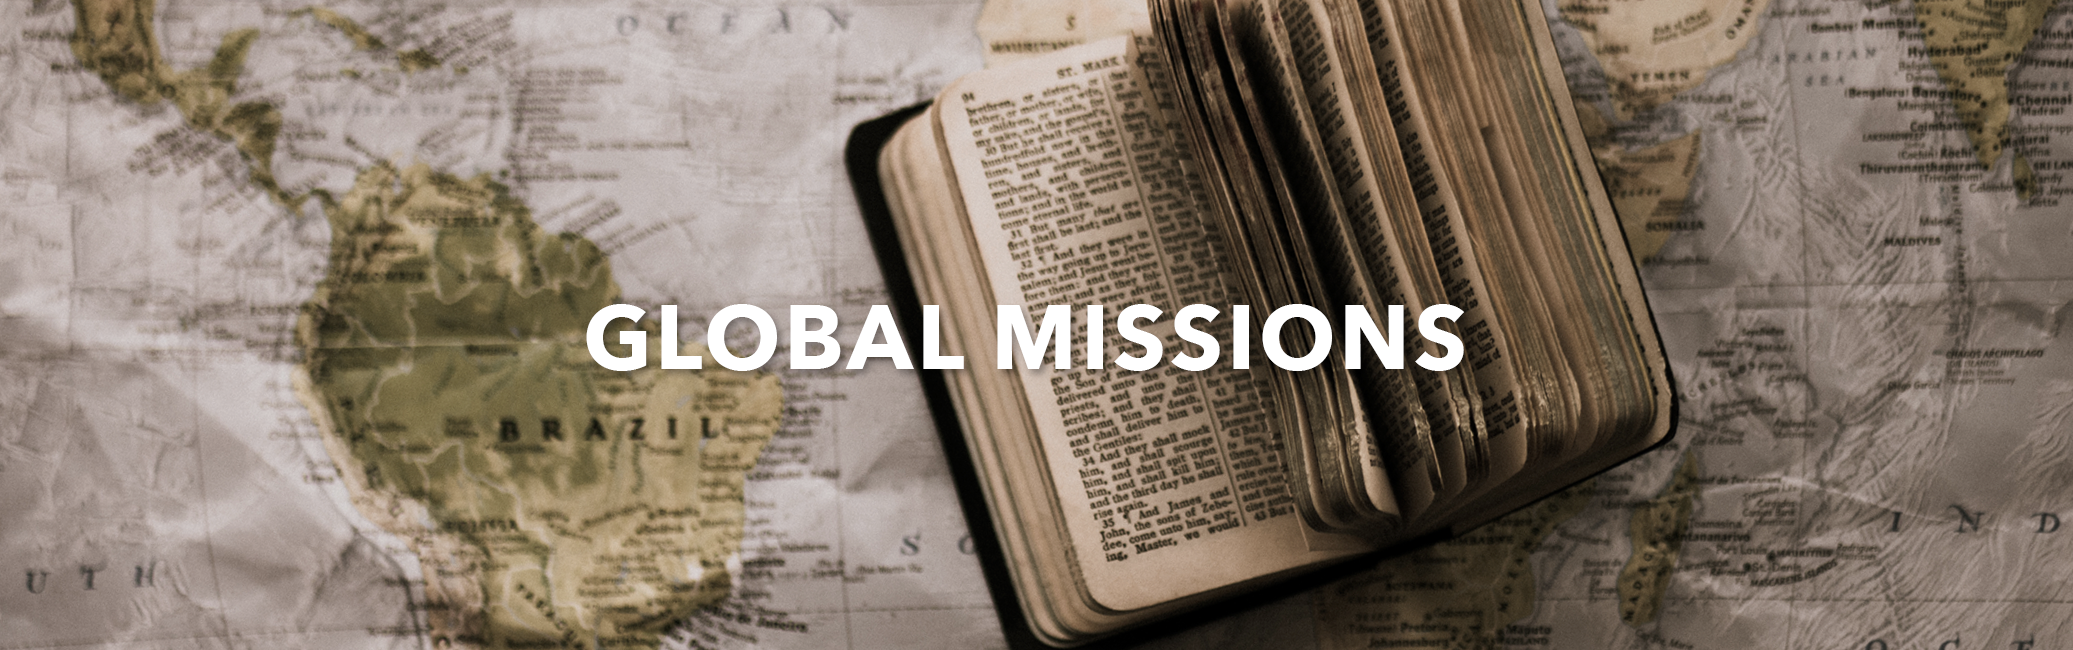 Global Missions – www.ccc.org